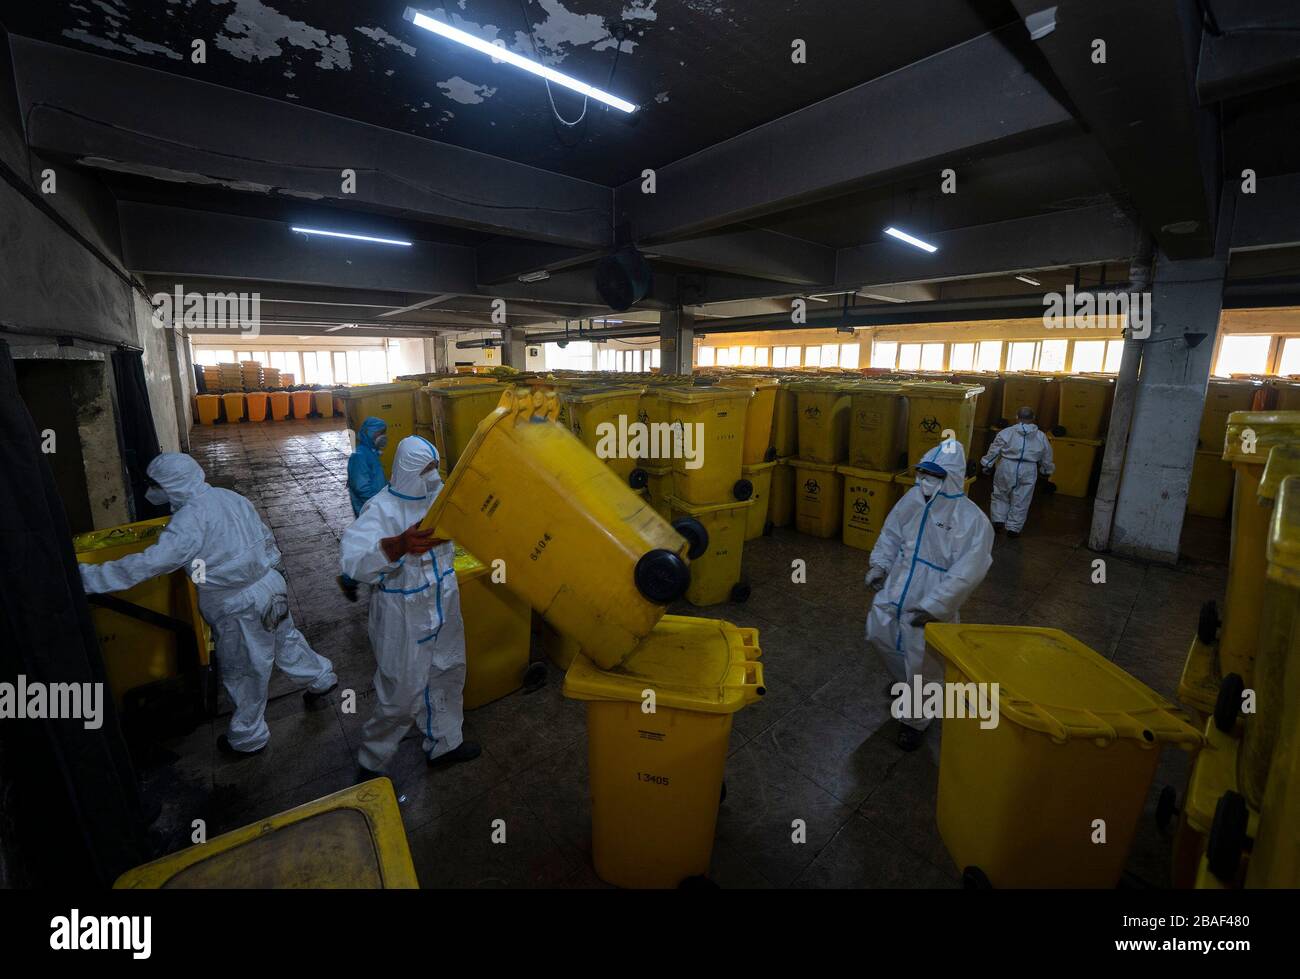 (200327) -- WUHAN, March 27, 2020 (Xinhua) -- Wang Peng (1st L) and his colleagues work at a medical waste treatment company in Wuhan, central China's Hubei Province, March 26, 2020. Wang Peng, 35, has been working for the Wuhan Hanshi Environmental Engineering Company for 9 years, where he is responsible for the disposal and incineration of medical waste.Protection against infection is a major challenge that Wang and his coworkers face, as they work 12-hour shifts to cope with the surging workload during the COVID-19 outbreak. 'I like what I'm doing,' Wang said, 'I'm not only making money for Stock Photo